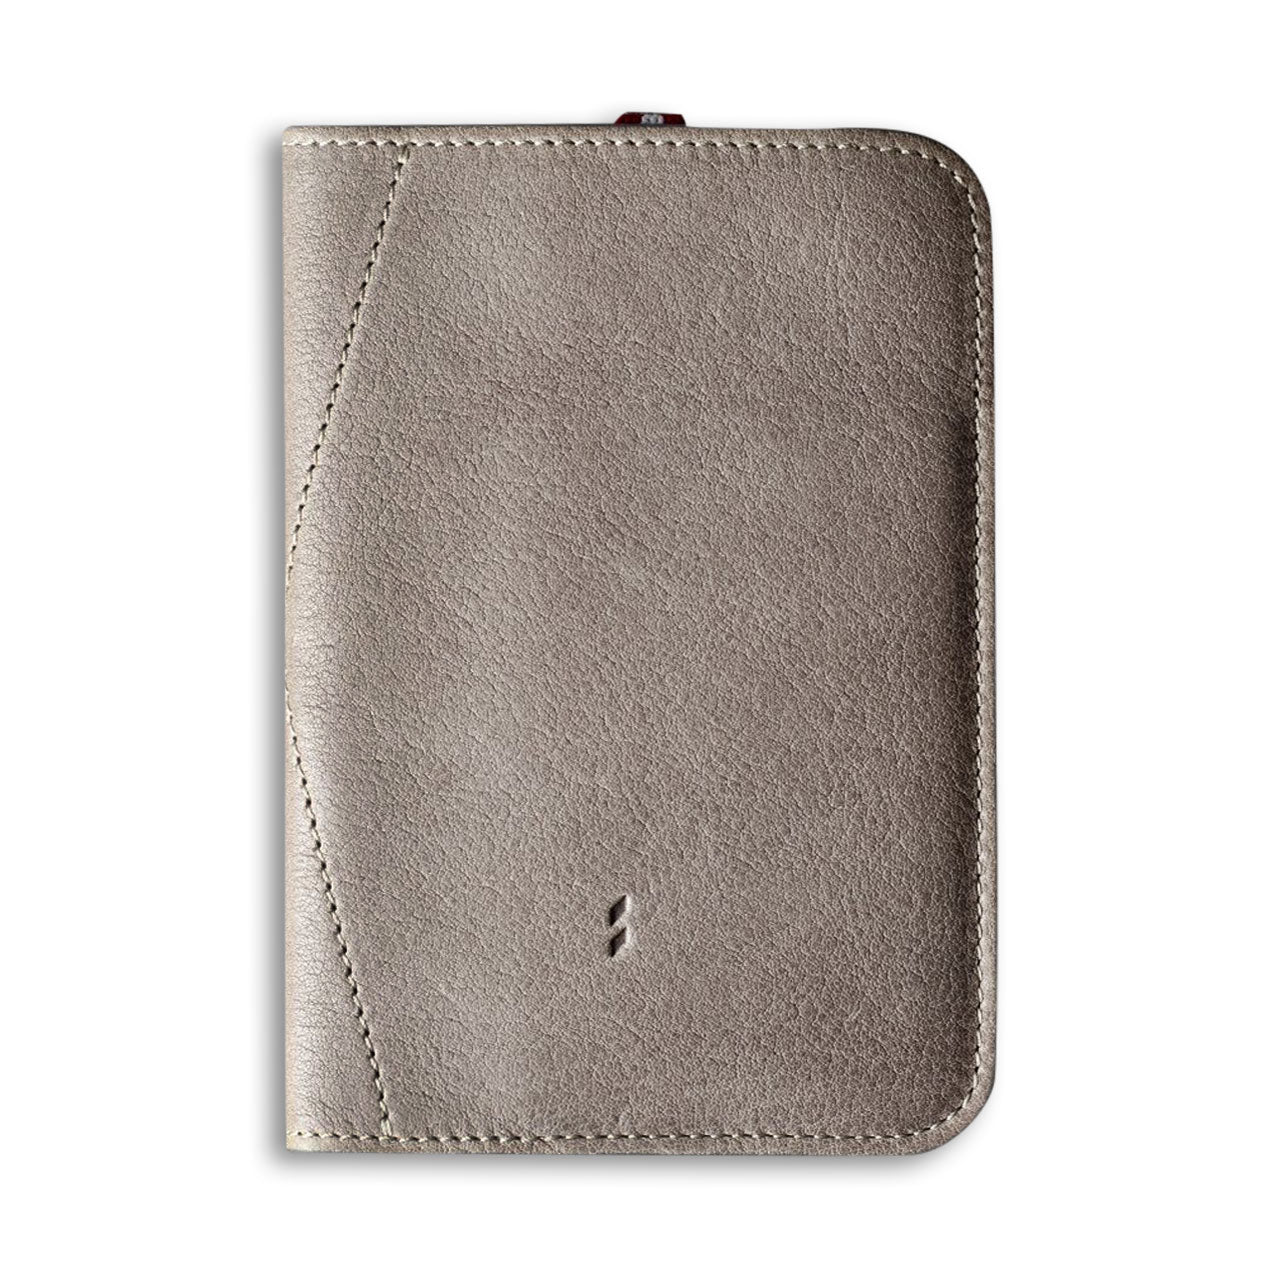 Hard Graft Cash & Coin Wallet | Uncrate Supply